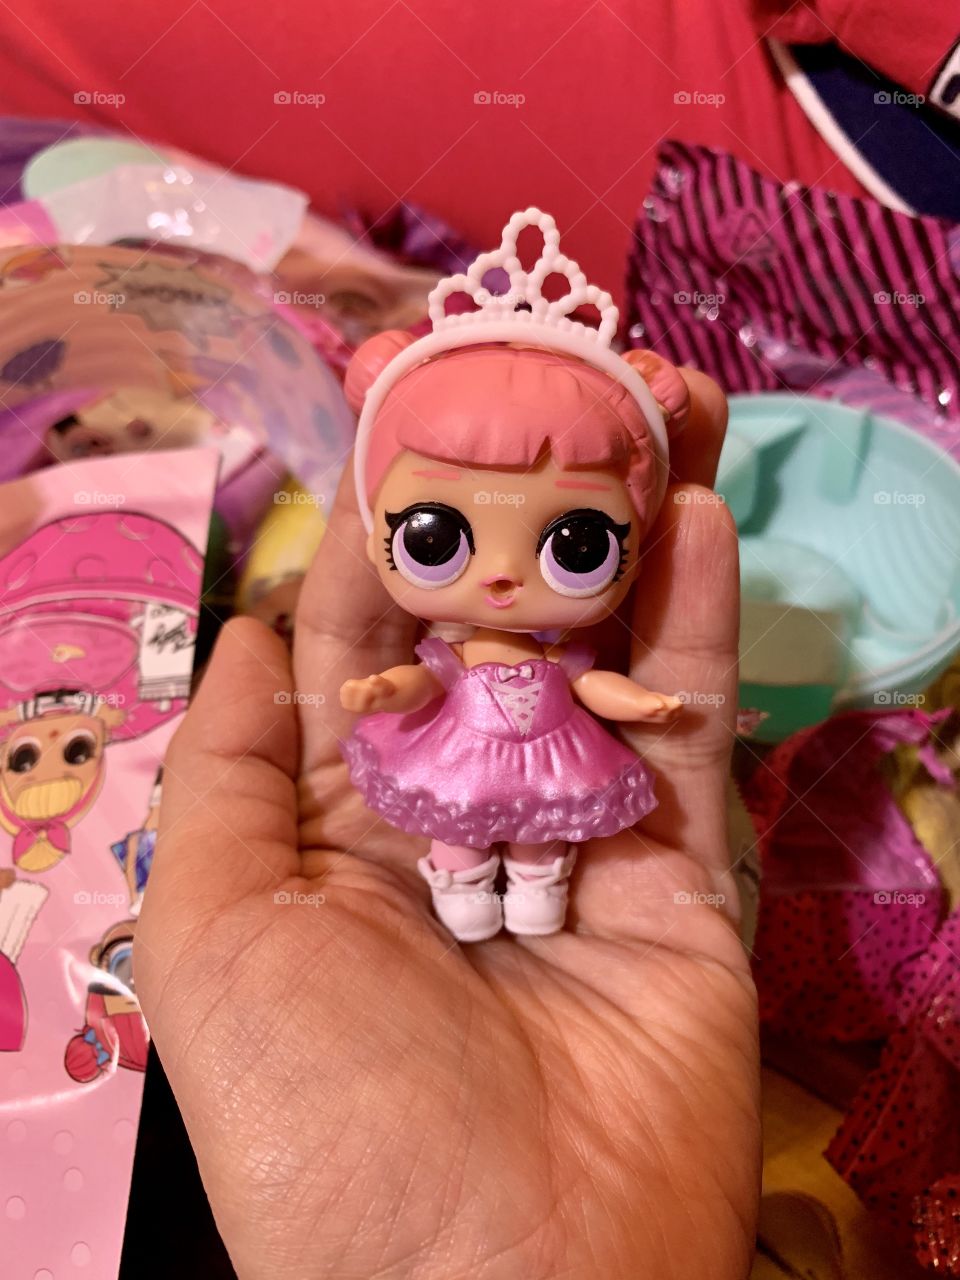 here she is baby Center Stage. Cute baby doll in a pink dress with a tiara on her head